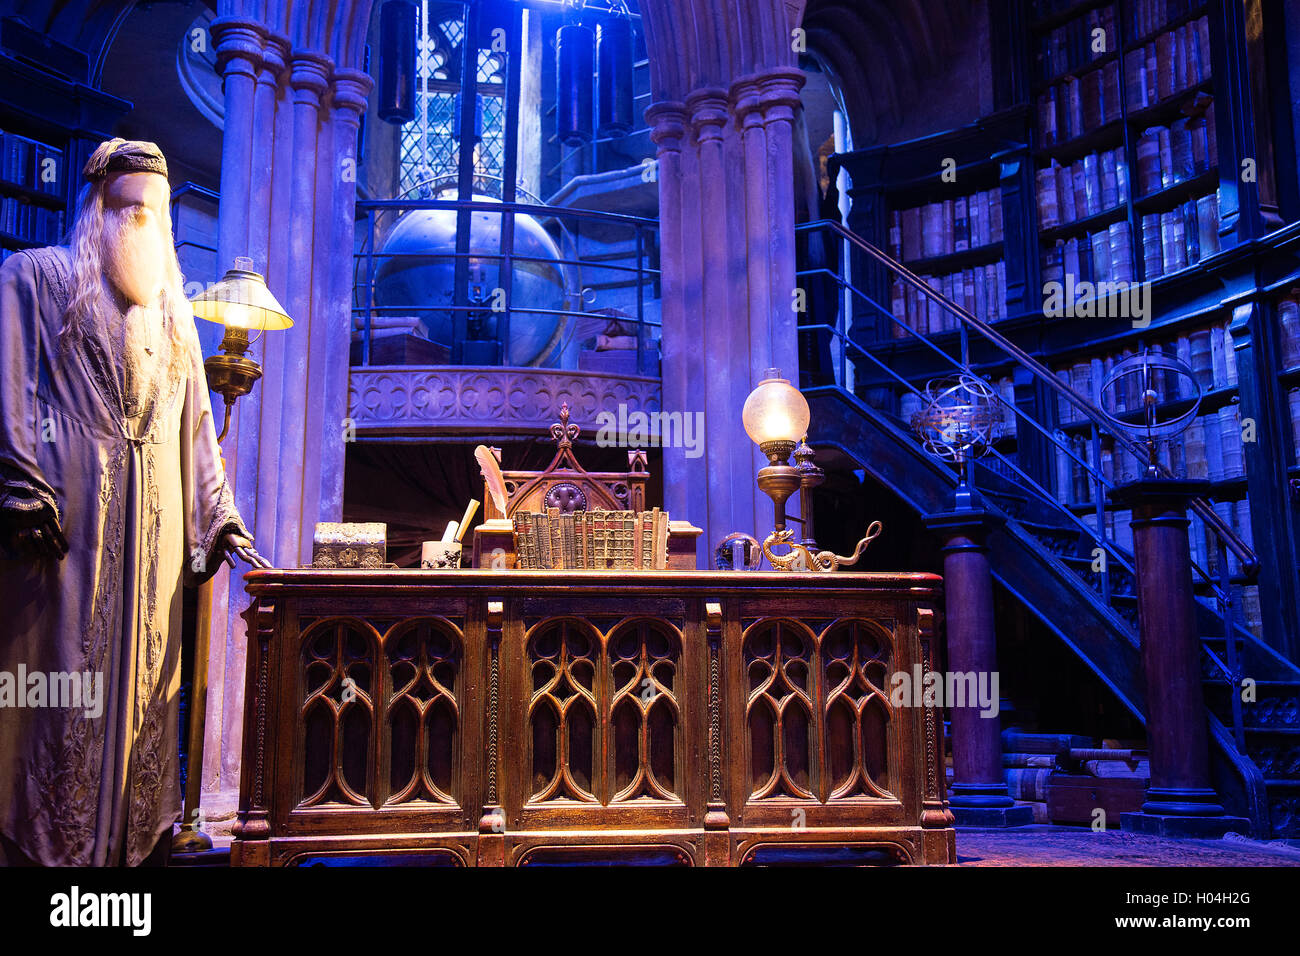 Albus Dumbledore's Office, Warner Brothers Studio Tour, The Making of Harry Potter, London Stock Photo